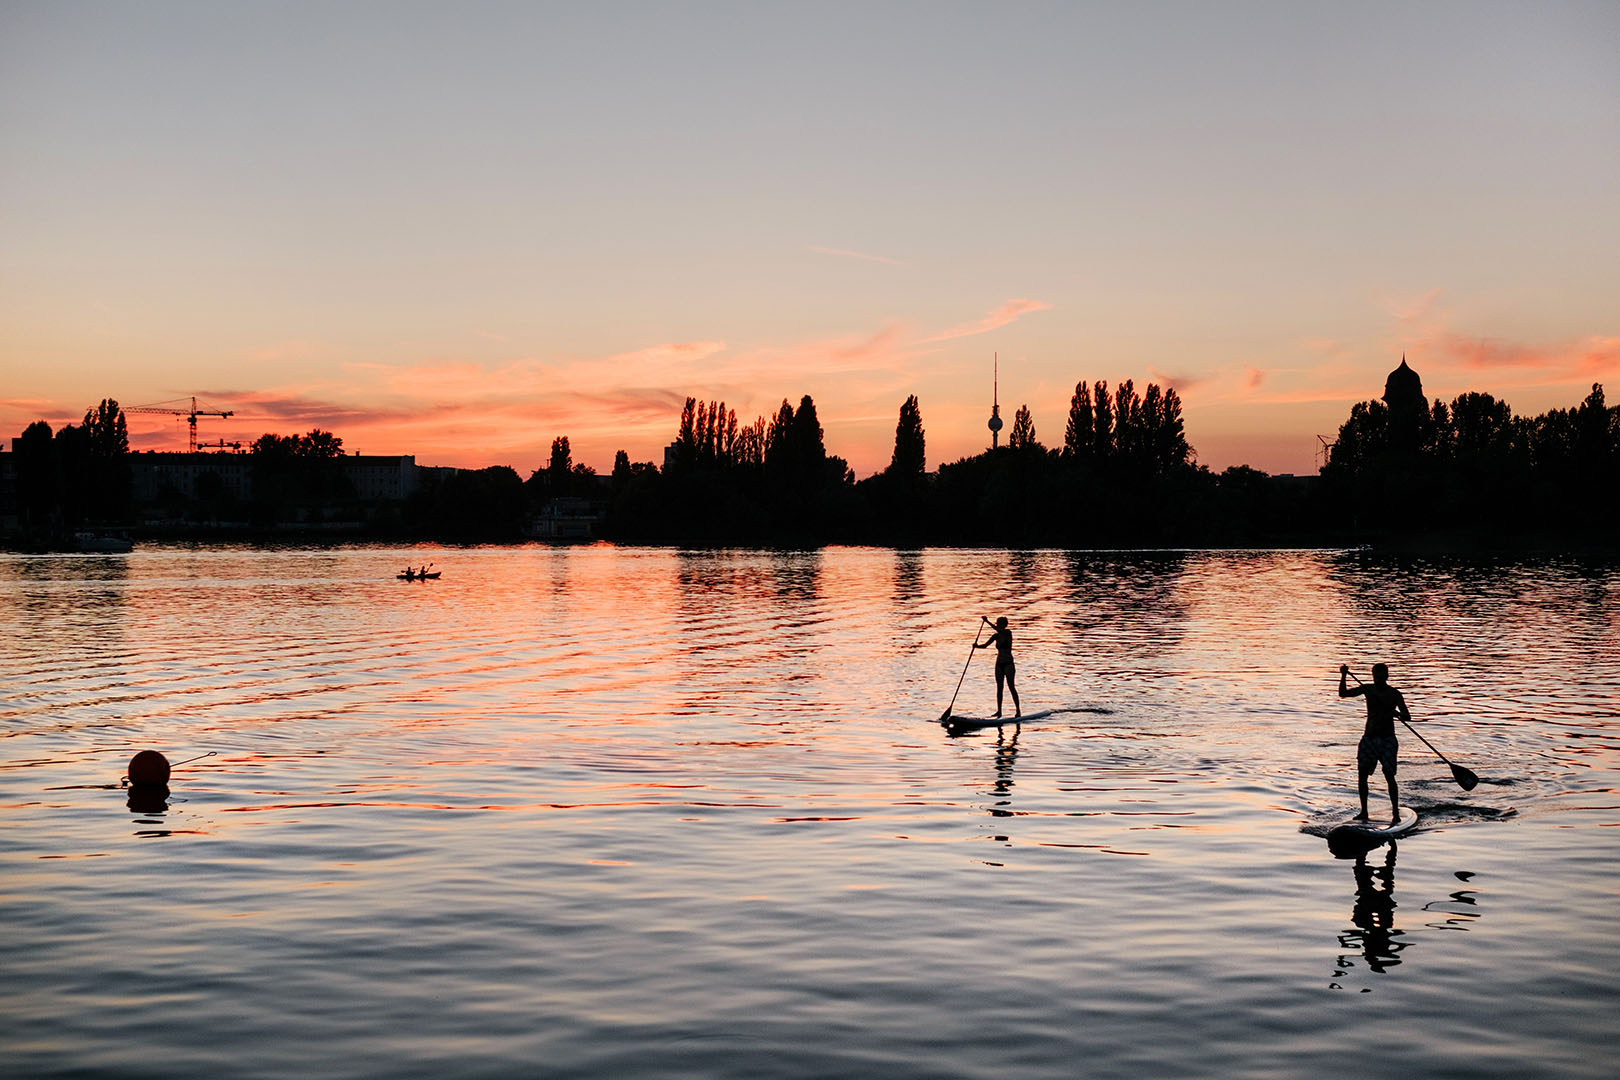 Health and Wealth: Illustrating a balance between the two with a photo of two people paddle boarding on a lake at sunset